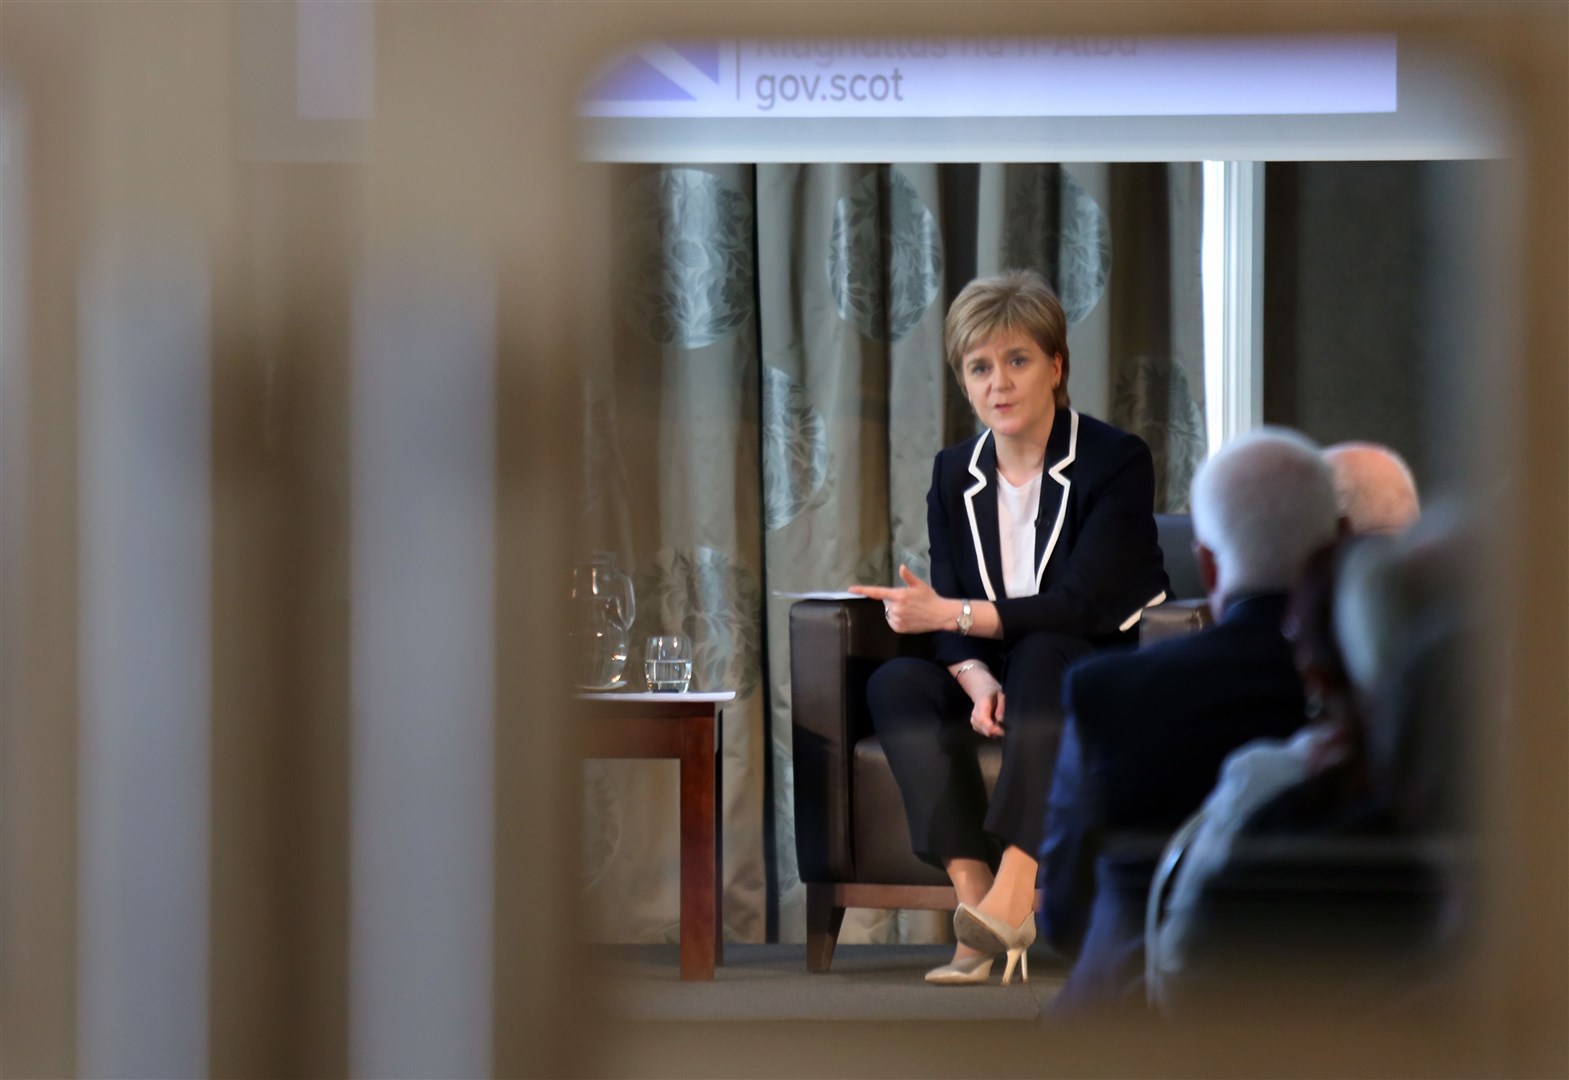 Nicola Sturgeon, pictured during a past National Economic Forum at the Kingsmills Hotel in Inverness. Pictures: John Baikie 037652.